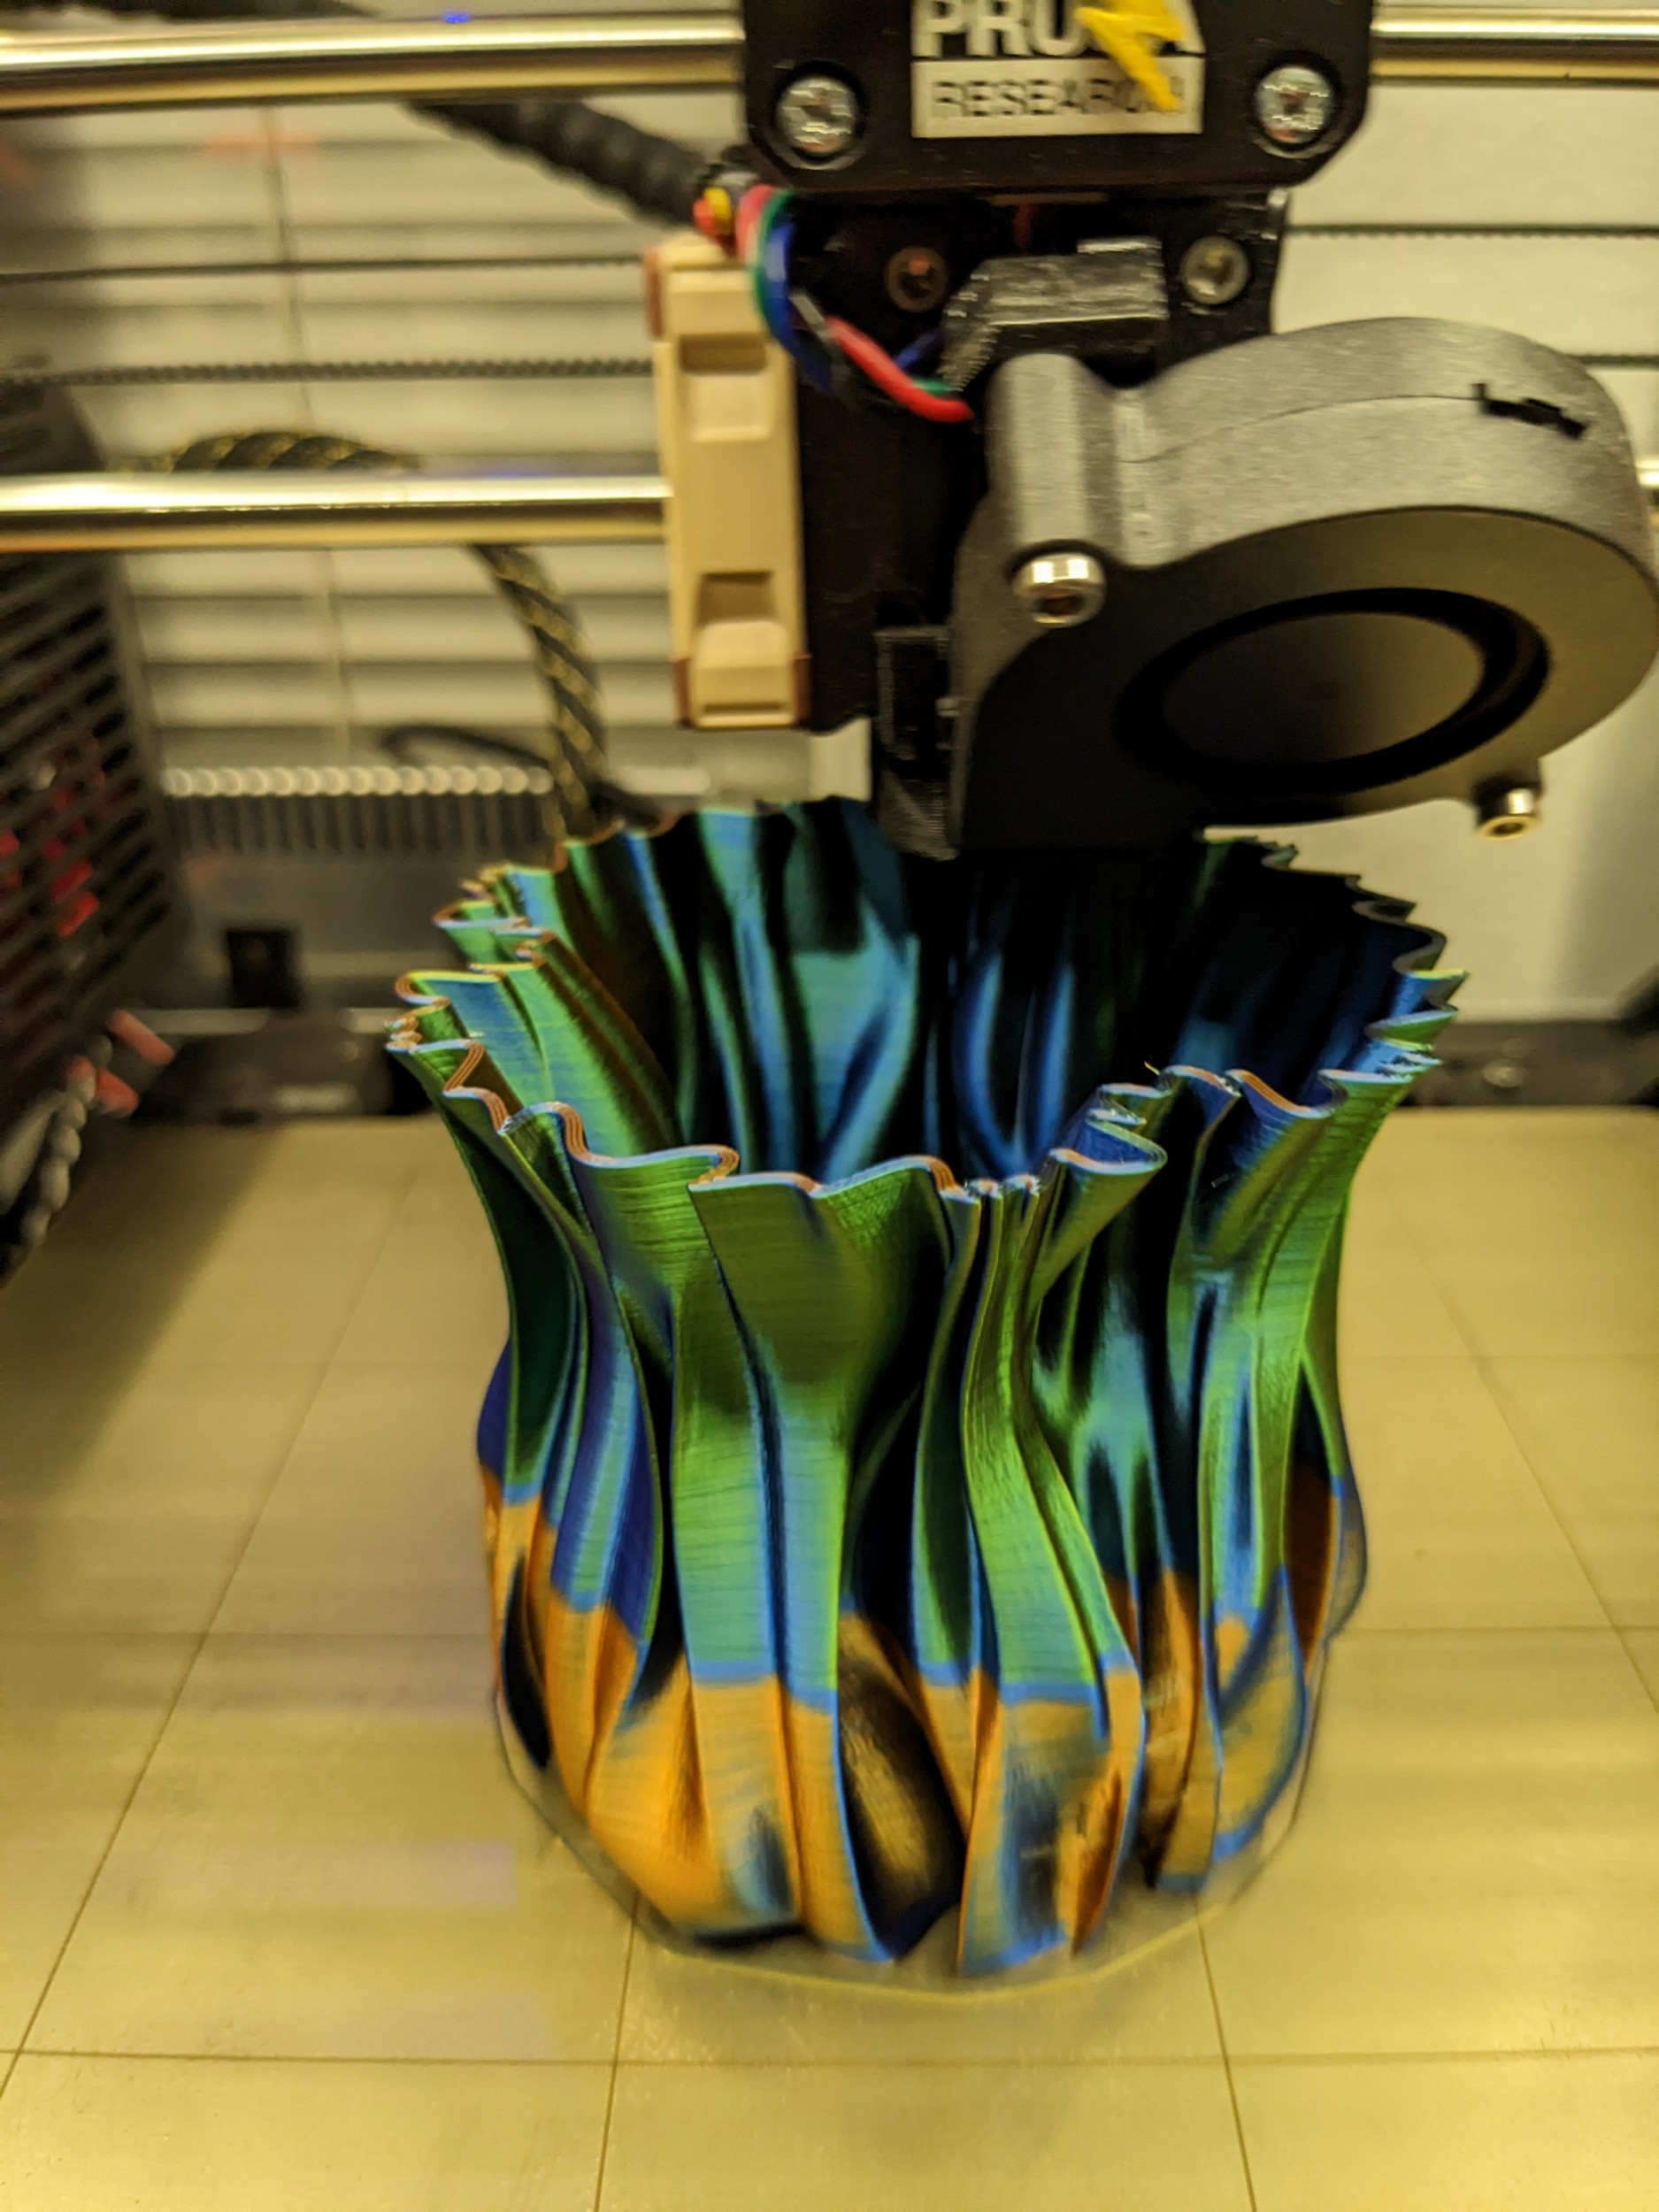 Tips for printing coextrusion tri-color filament – PrusaSlicer